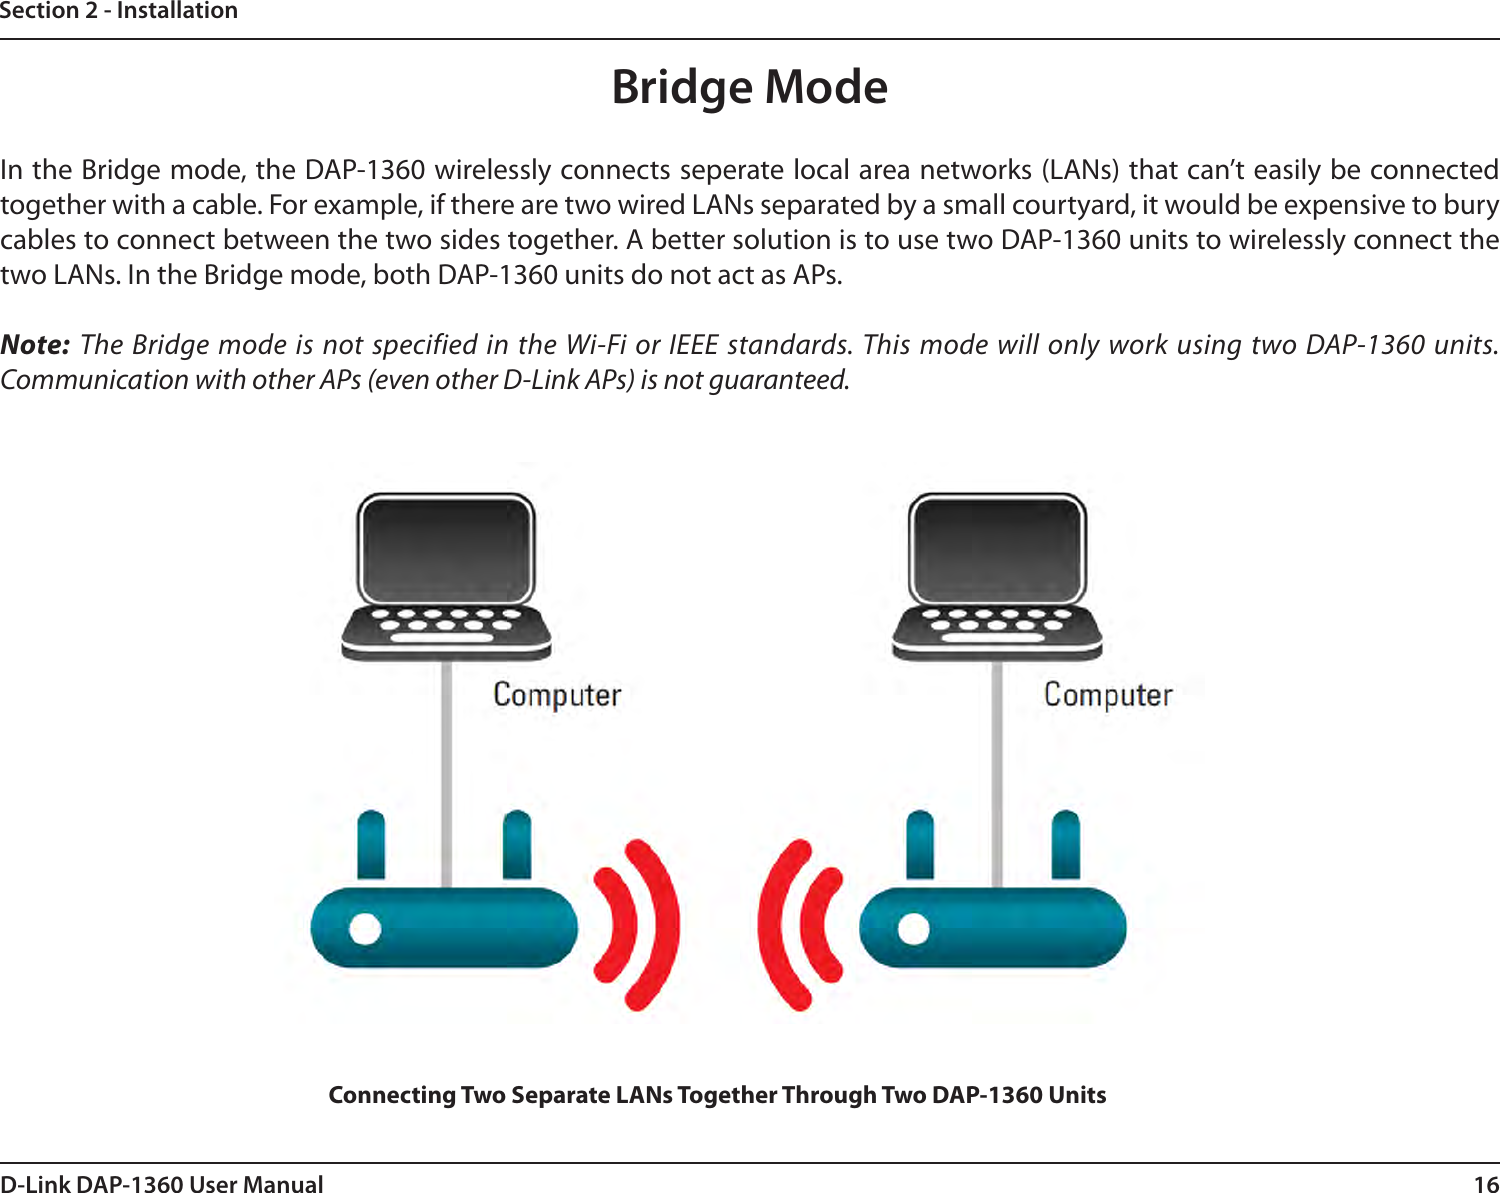 16D-Link DAP-1360 User ManualSection 2 - InstallationBridge ModeIn the Bridge mode, the DAP-1360 wirelessly connects seperate local area networks (LANs) that can’t easily be connected together with a cable. For example, if there are two wired LANs separated by a small courtyard, it would be expensive to bury cables to connect between the two sides together. A better solution is to use two DAP-1360 units to wirelessly connect the two LANs. In the Bridge mode, both DAP-1360 units do not act as APs. Note: The Bridge mode is not specified in the Wi-Fi or IEEE standards. This mode will only work using two DAP-1360 units. Communication with other APs (even other D-Link APs) is not guaranteed.Connecting Two Separate LANs Together Through Two DAP-1360 Units